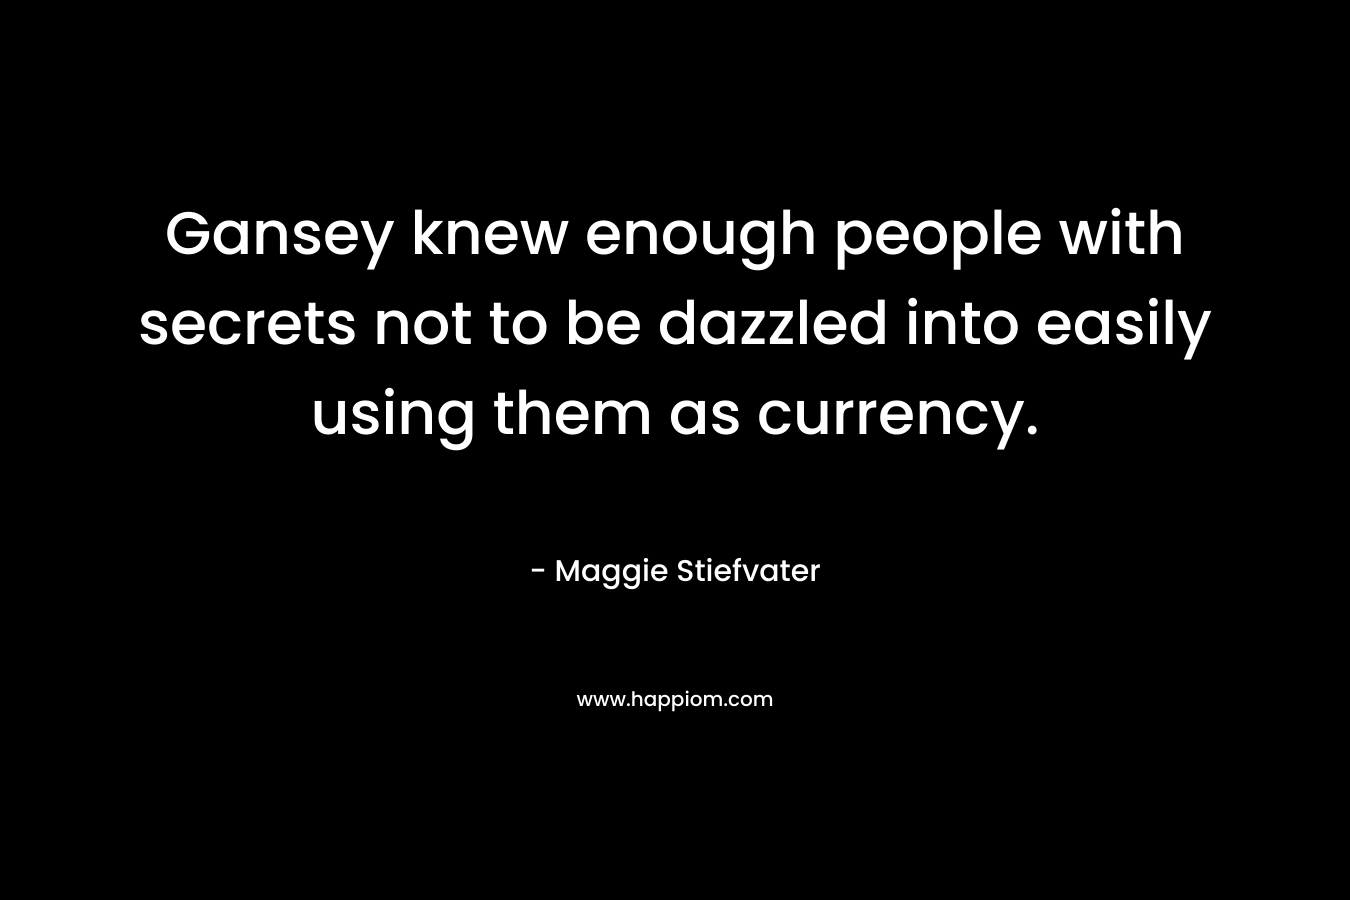 Gansey knew enough people with secrets not to be dazzled into easily using them as currency. – Maggie Stiefvater